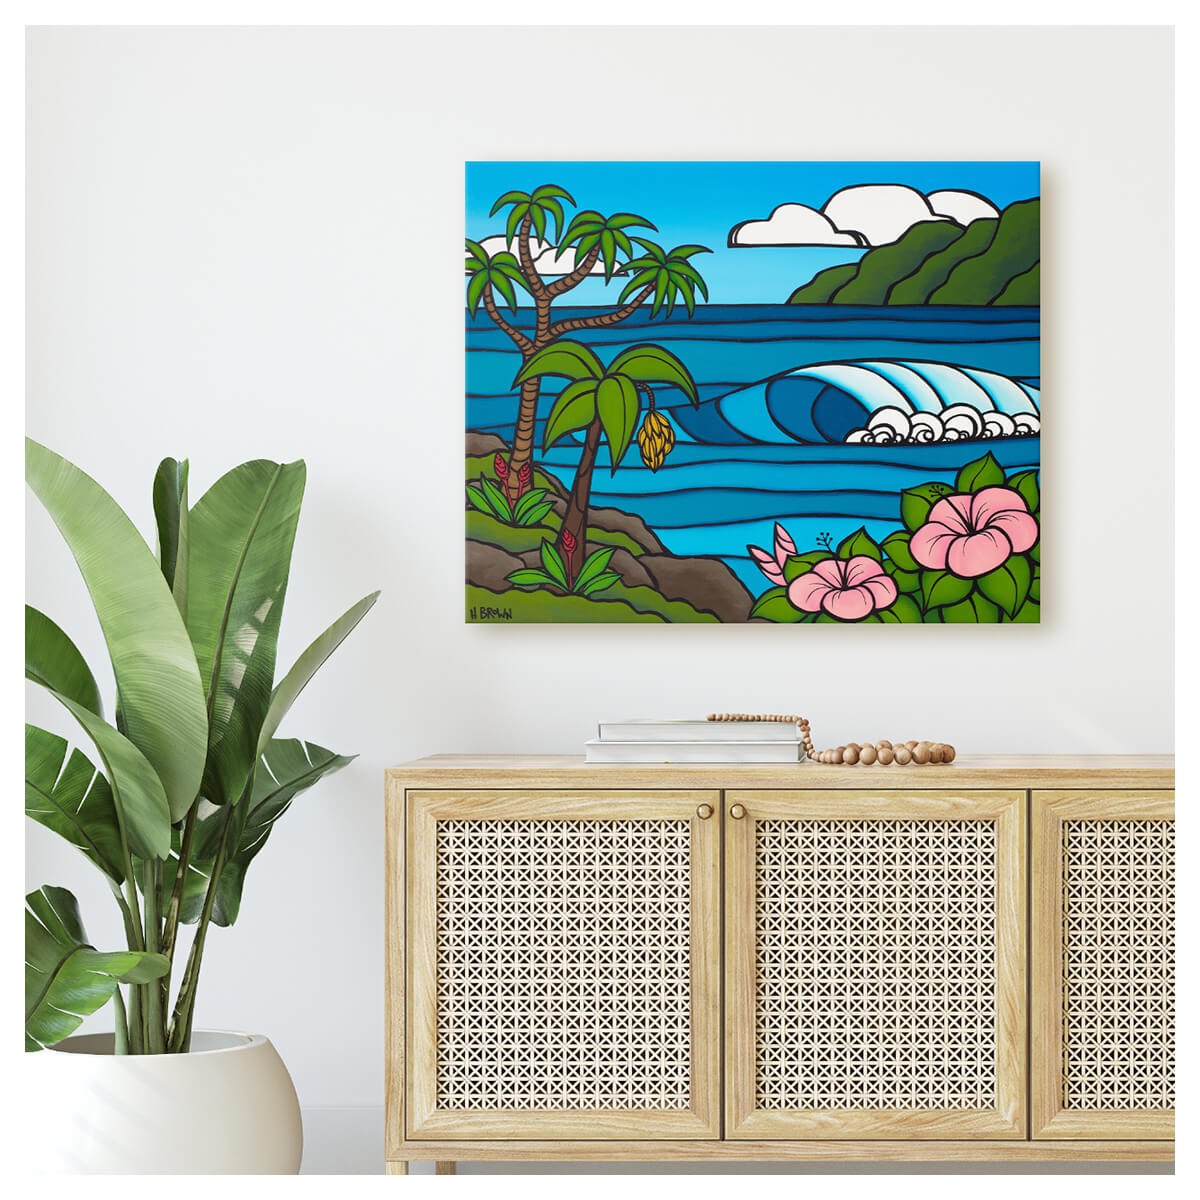 Large tropical canvas wall art by Kauai artist Heather Brown, featuring a serene Hawaii seascape with a cresting wave, framed by pink hibiscus flowers and a banana tree with green mountains in the distance.